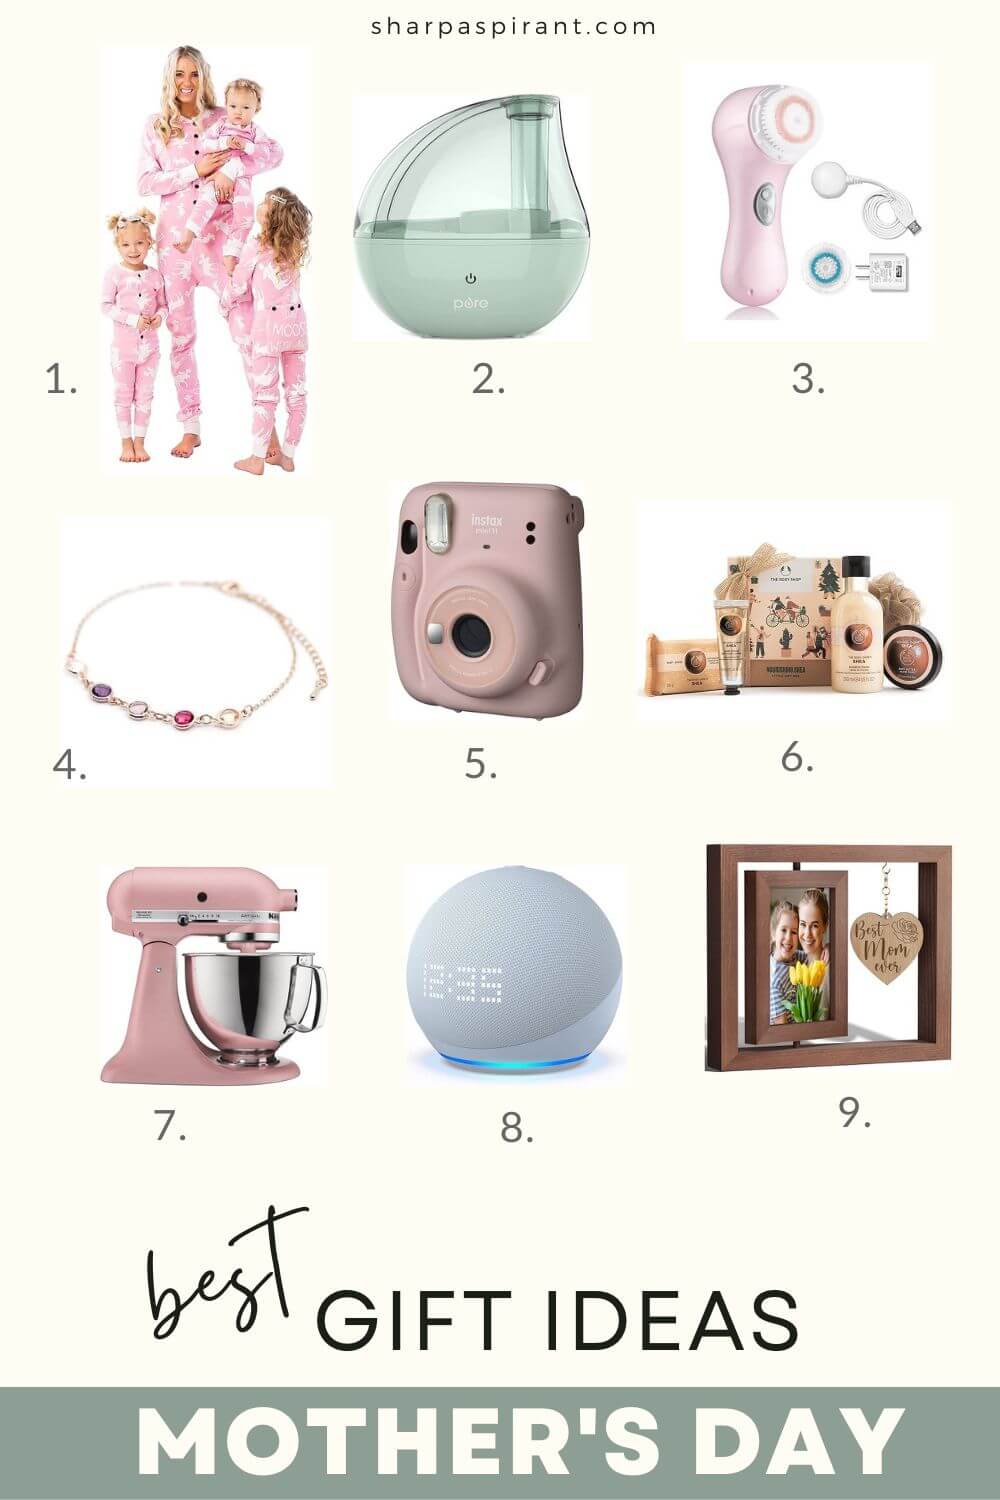 Are you looking for the best Mother's Day gift ideas? Check out our list of 30 thoughtful and unique ideas to make her day special.